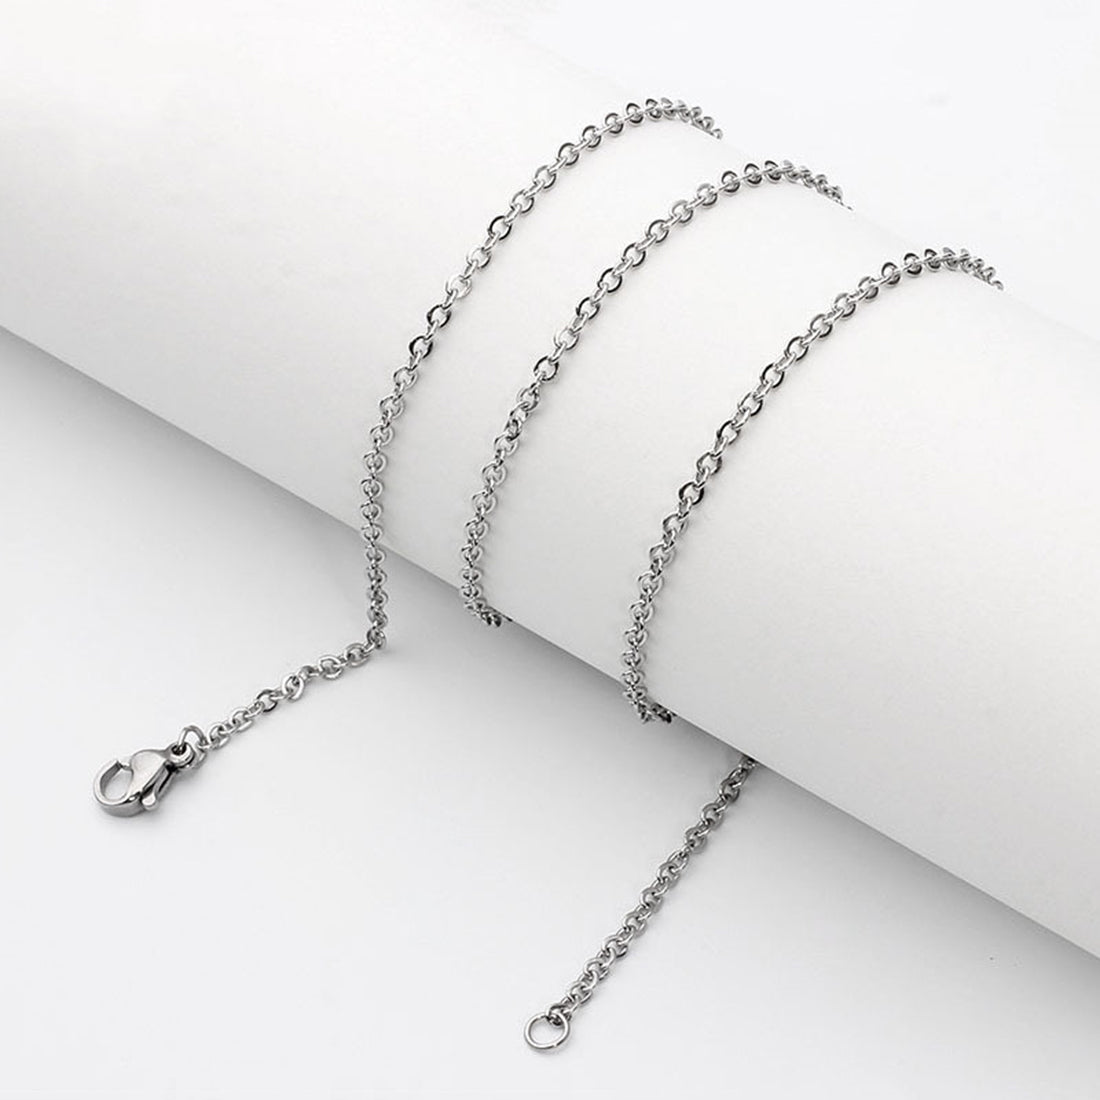 Unisex Stainless Steel Necklace - Rivendell Shop